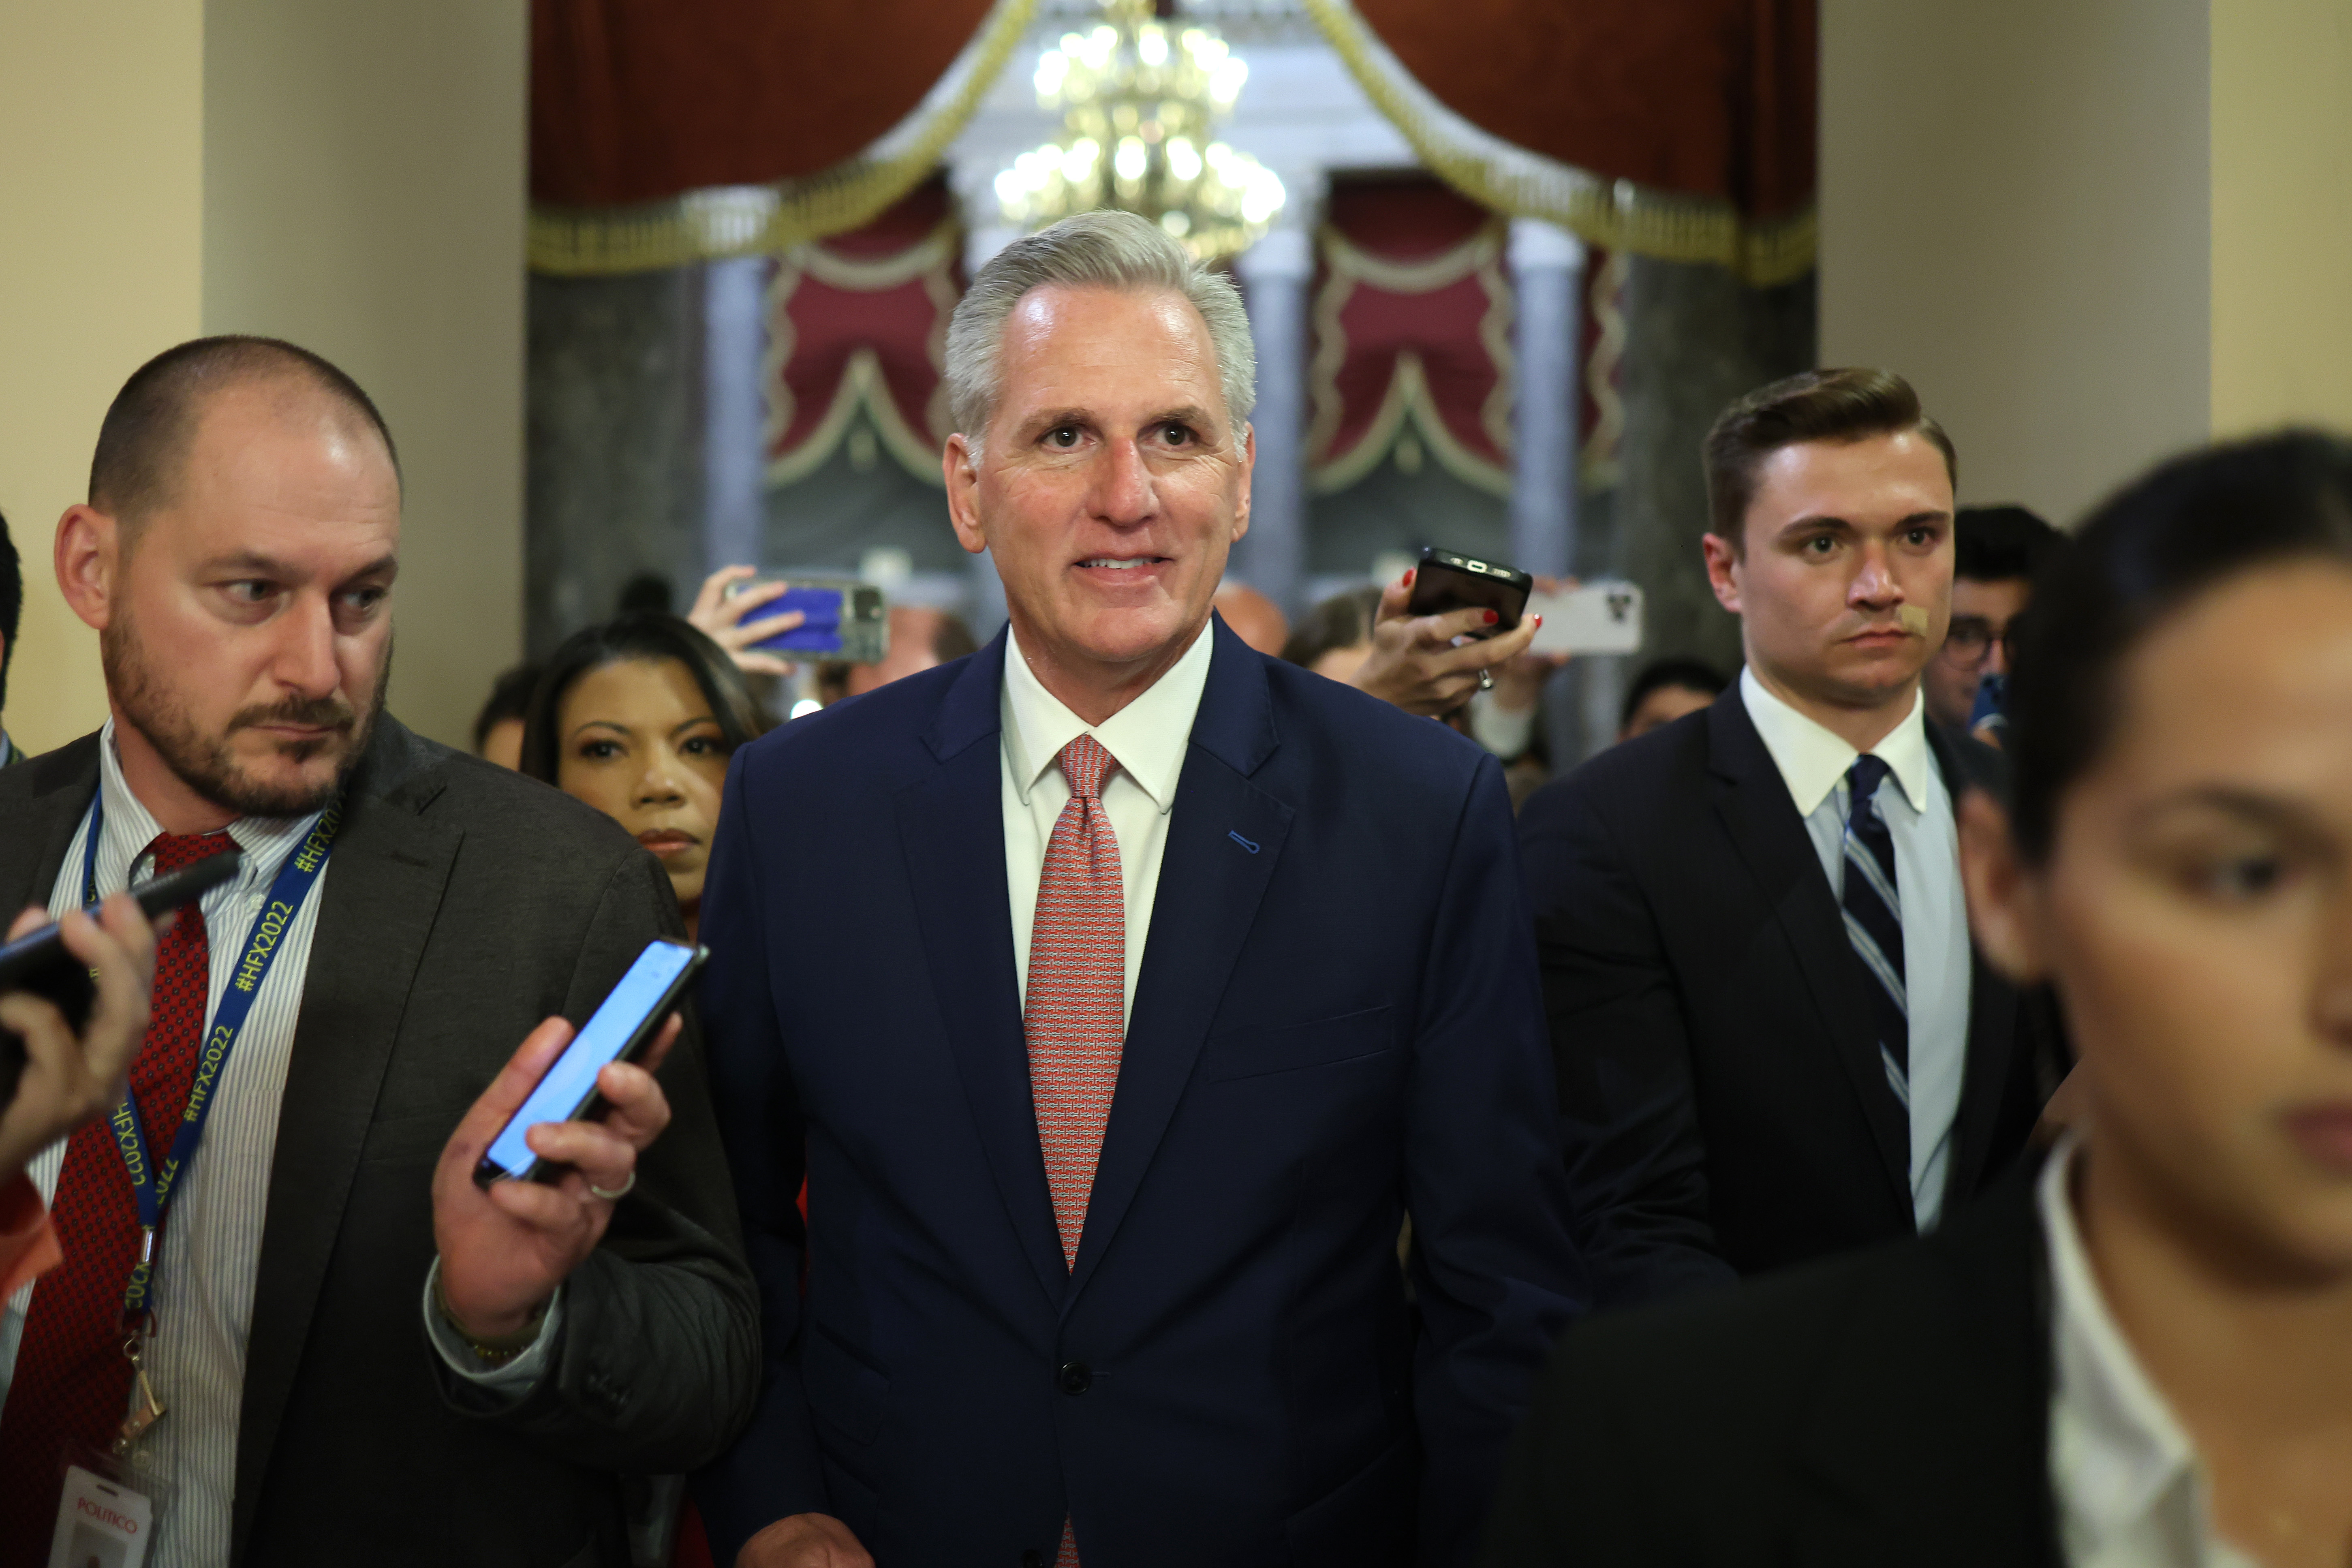 Kevin McCarthy surrounded by reporters and colleagues